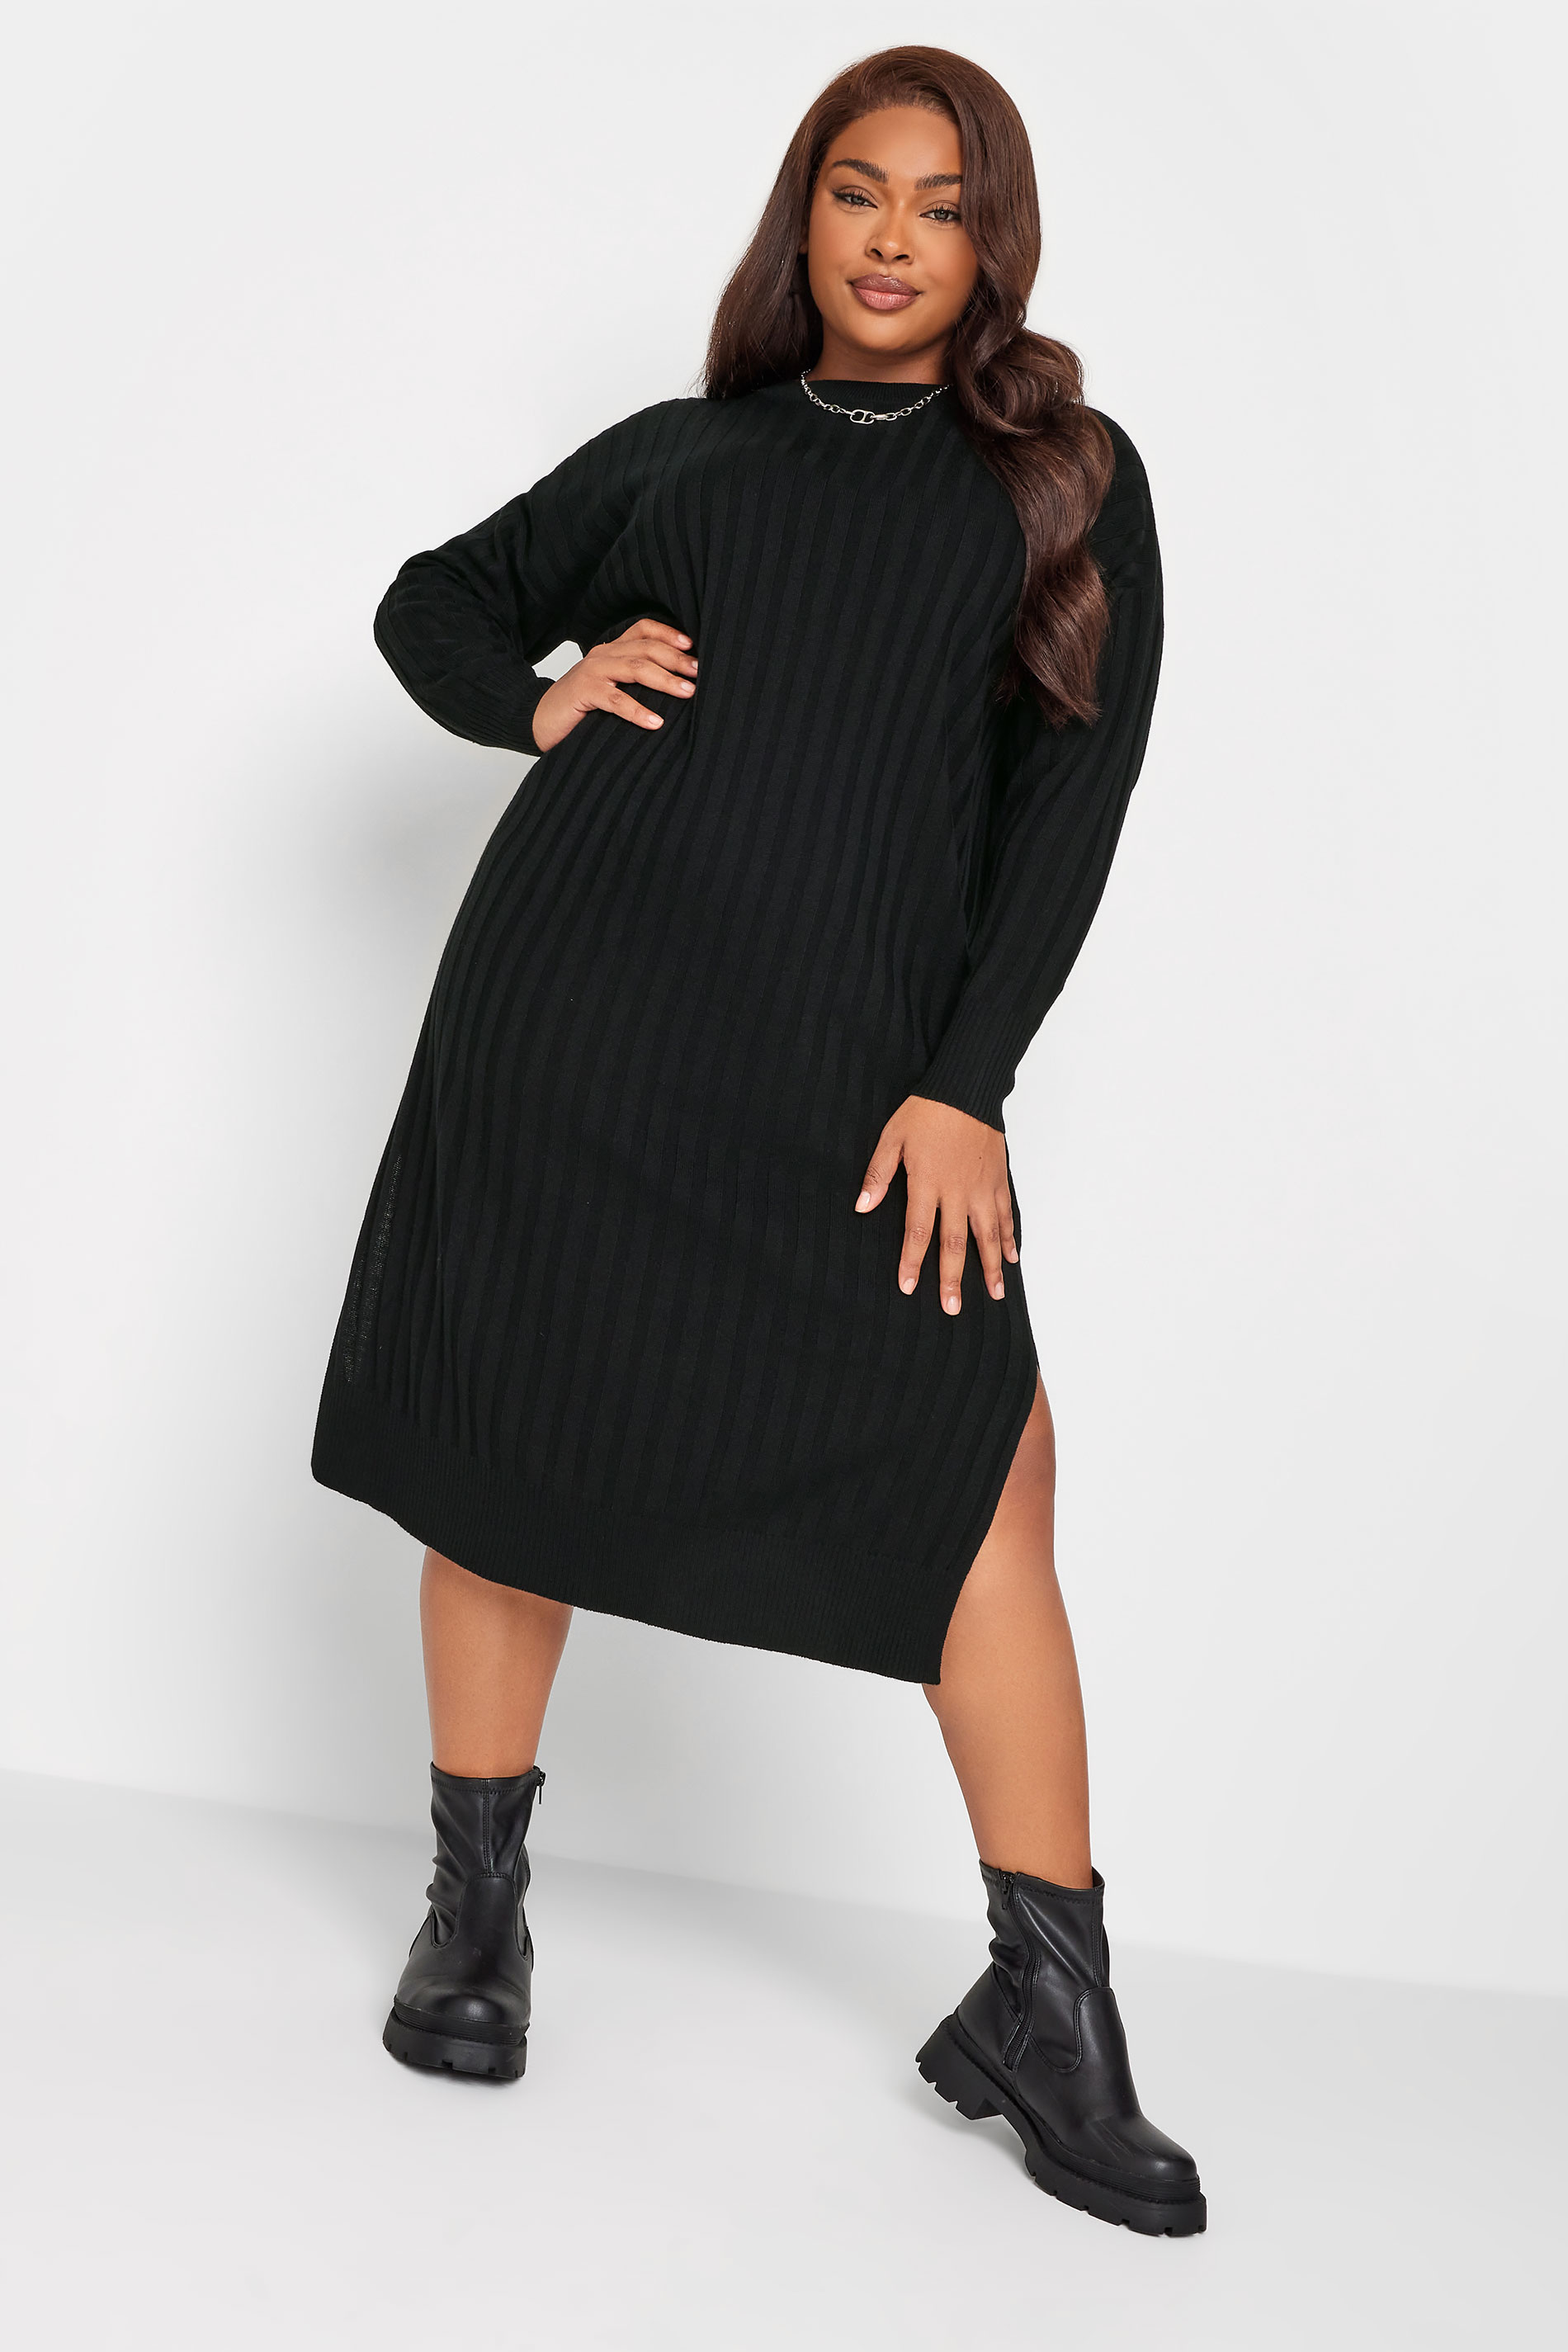 https://cdn.yoursclothing.com/Images/ProductImages/bfb2ae1b-4e0e-42_192944_A.jpg